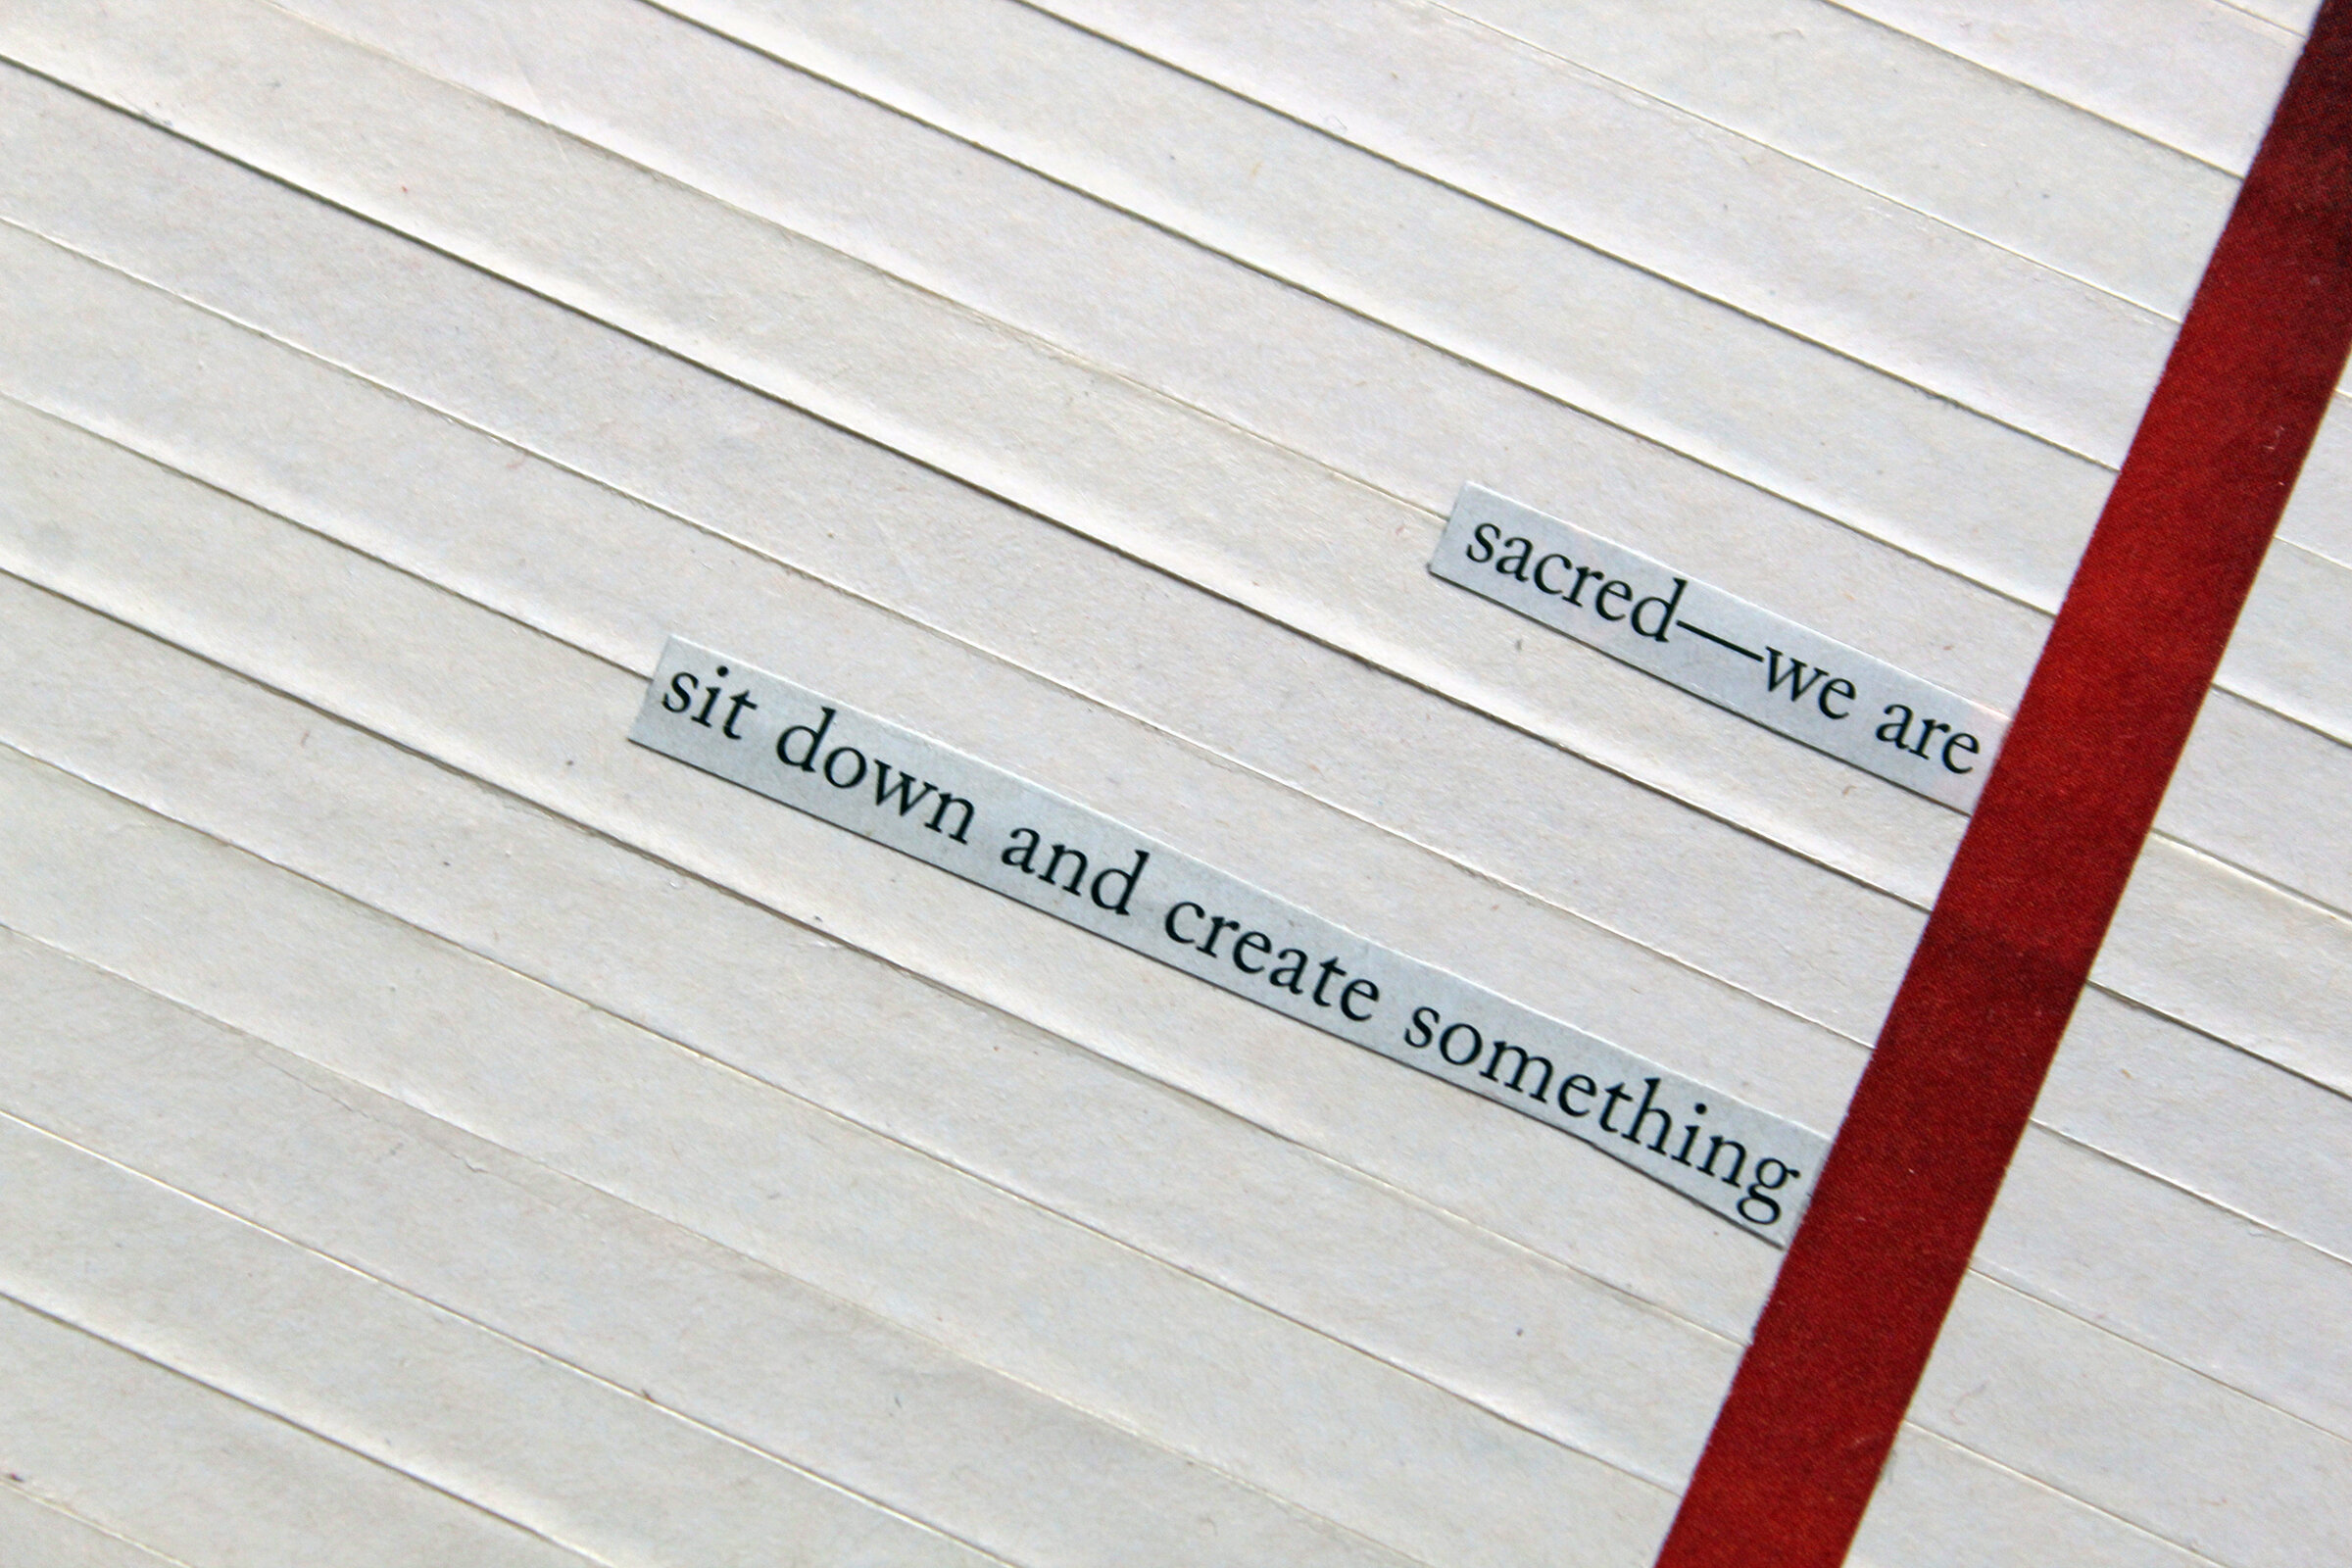  Detail – “sit down and create something” 